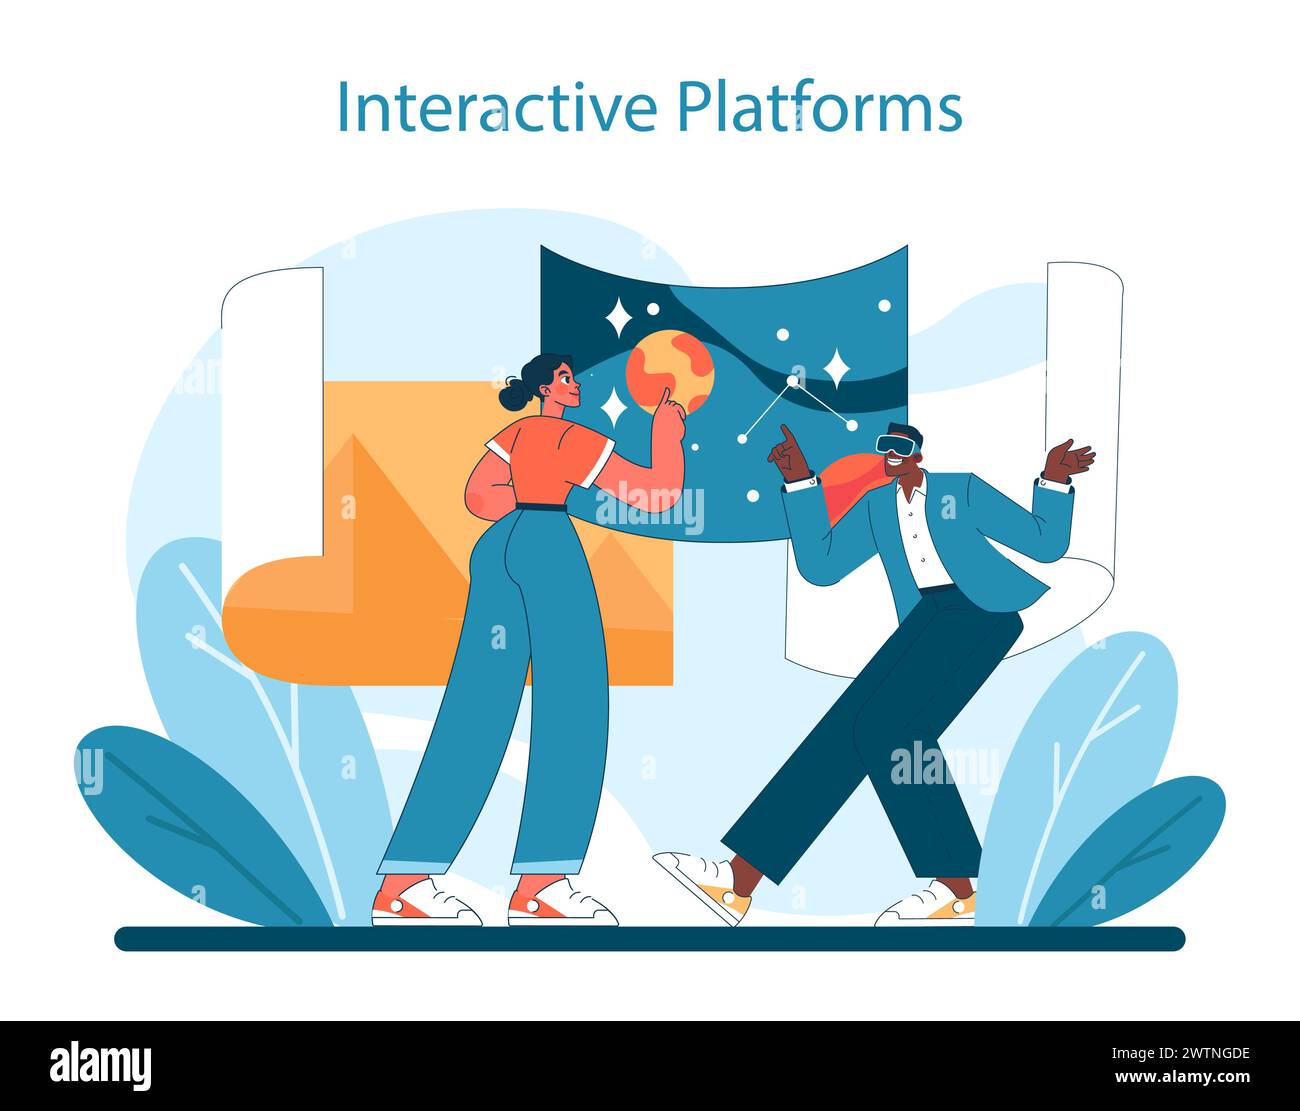 Interactive Platforms concept in Virtual Tourism. Users connect through advanced technology, exploring space and stars in a virtual environment. Vector illustration. Stock Vector